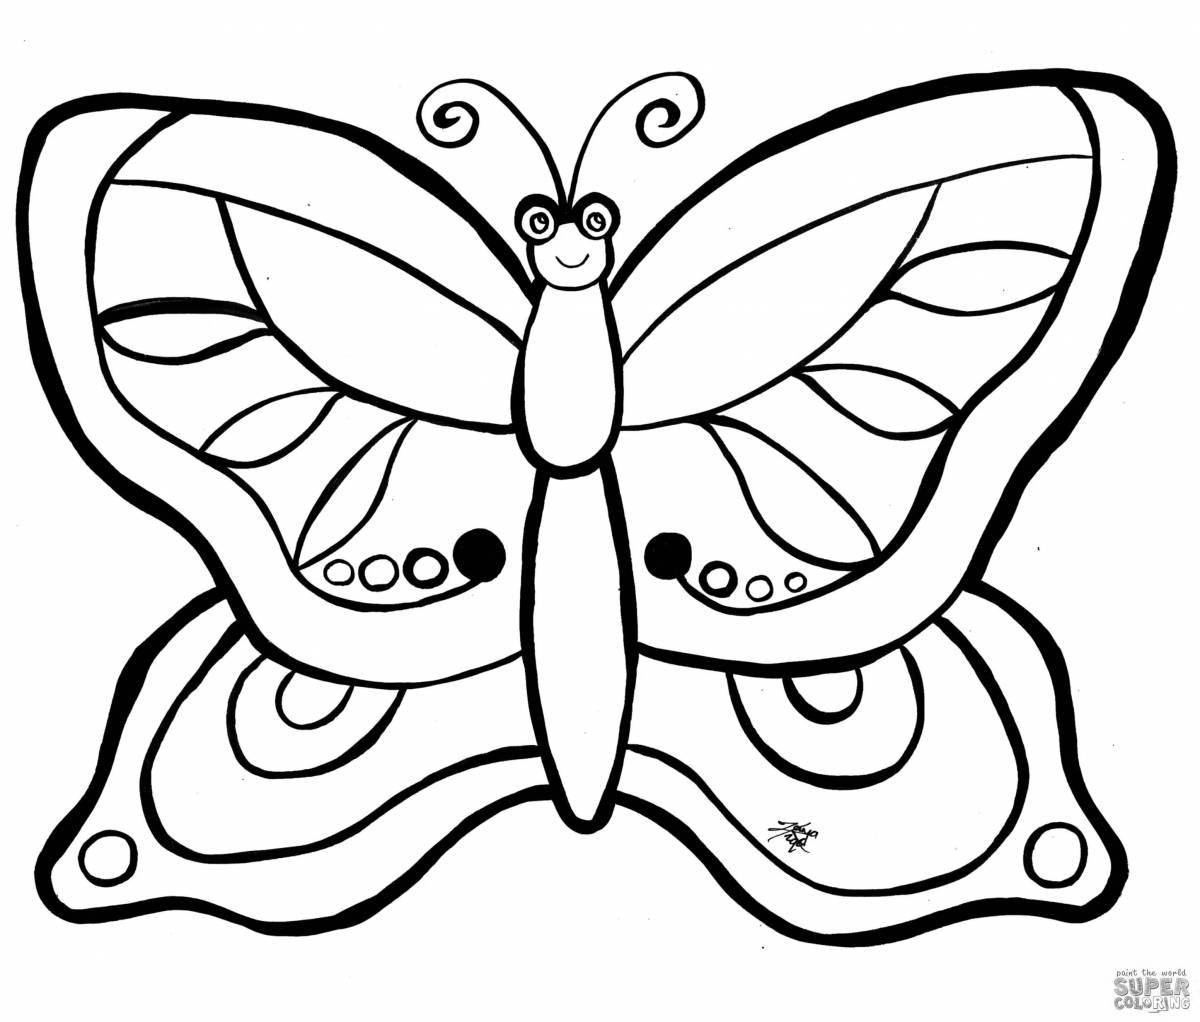 Refreshing butterfly coloring page